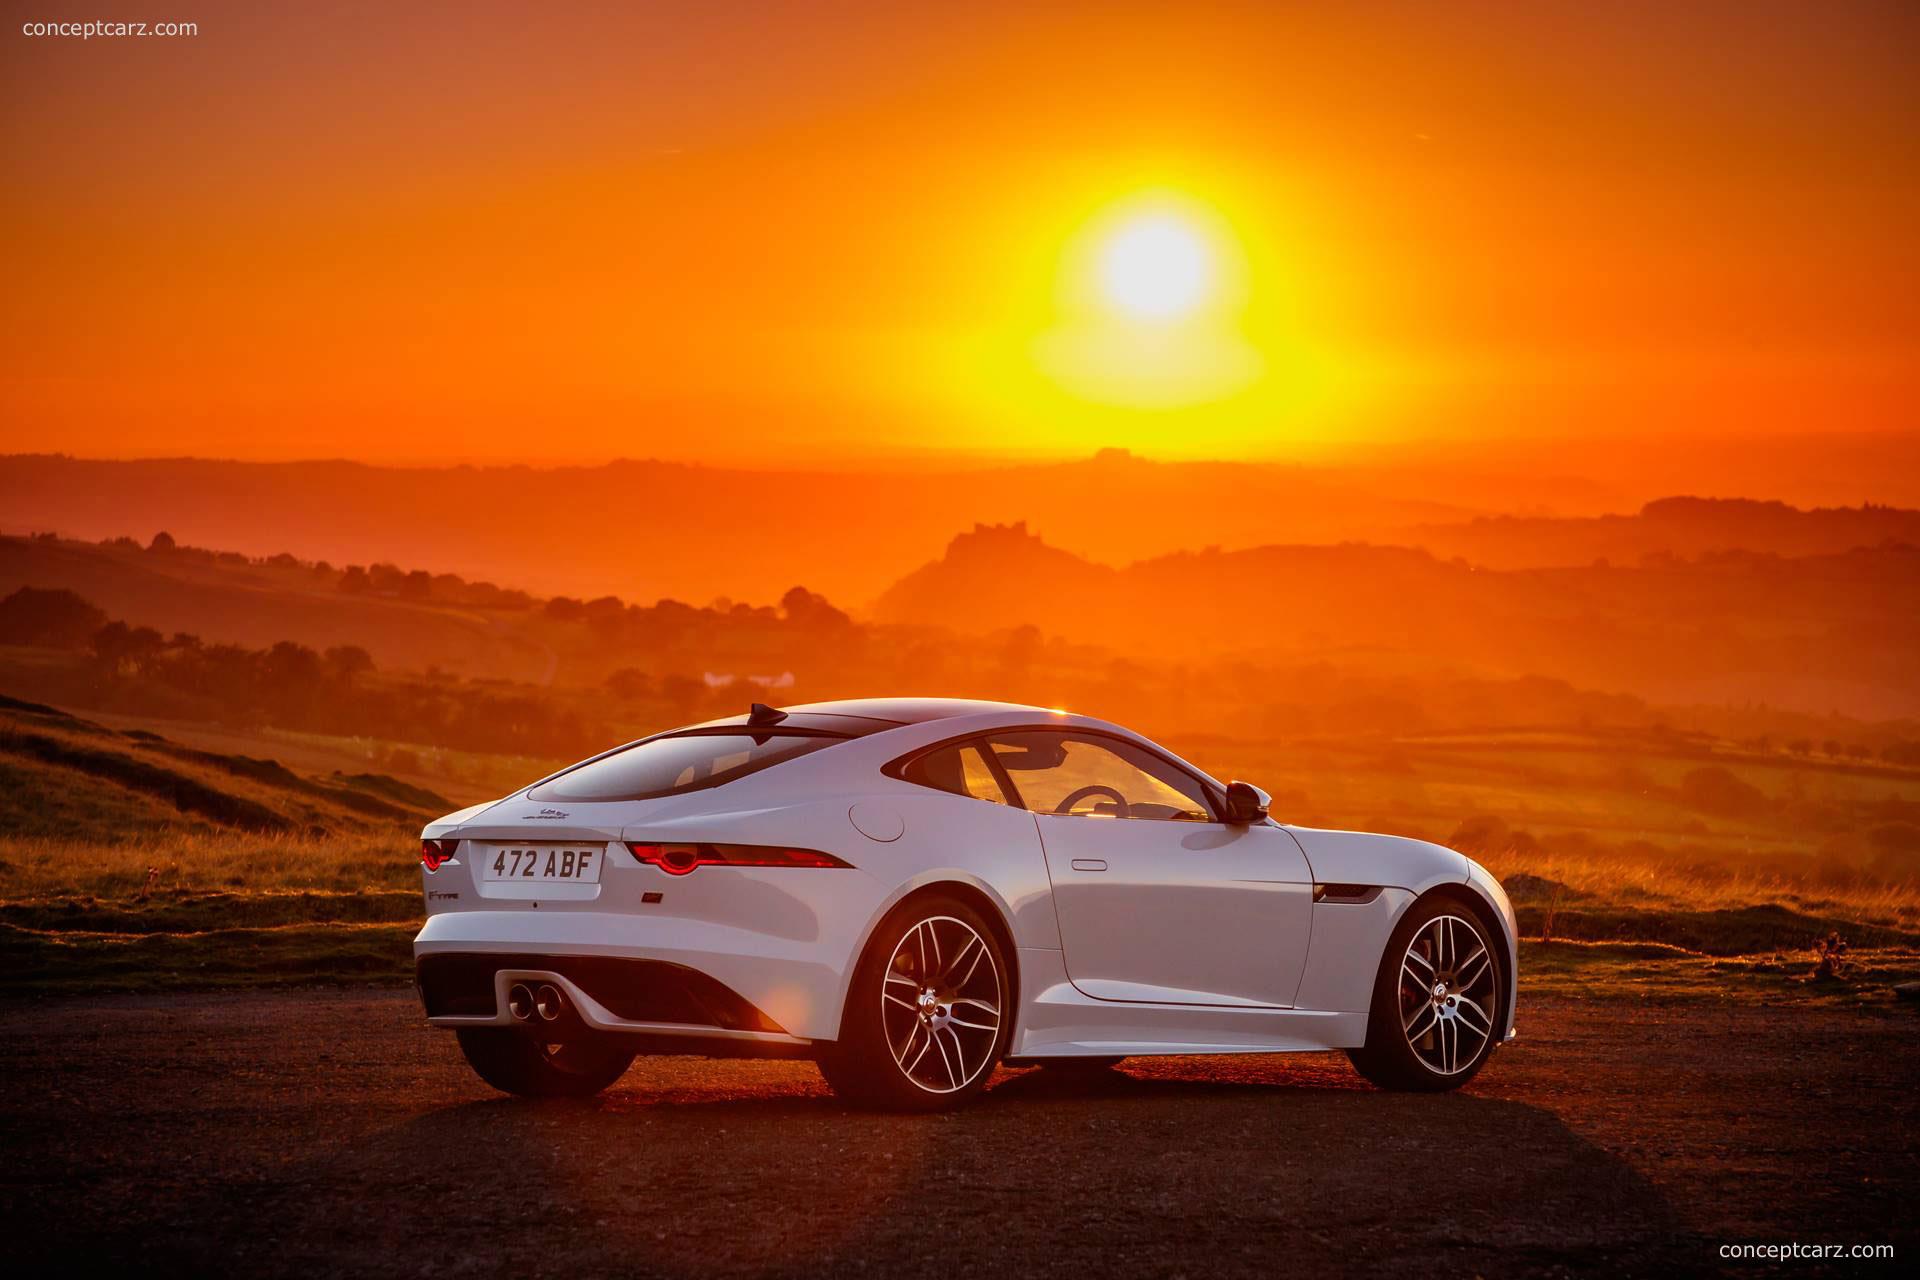 Jaguar FType Checkered Flag Limited Edition News and Information